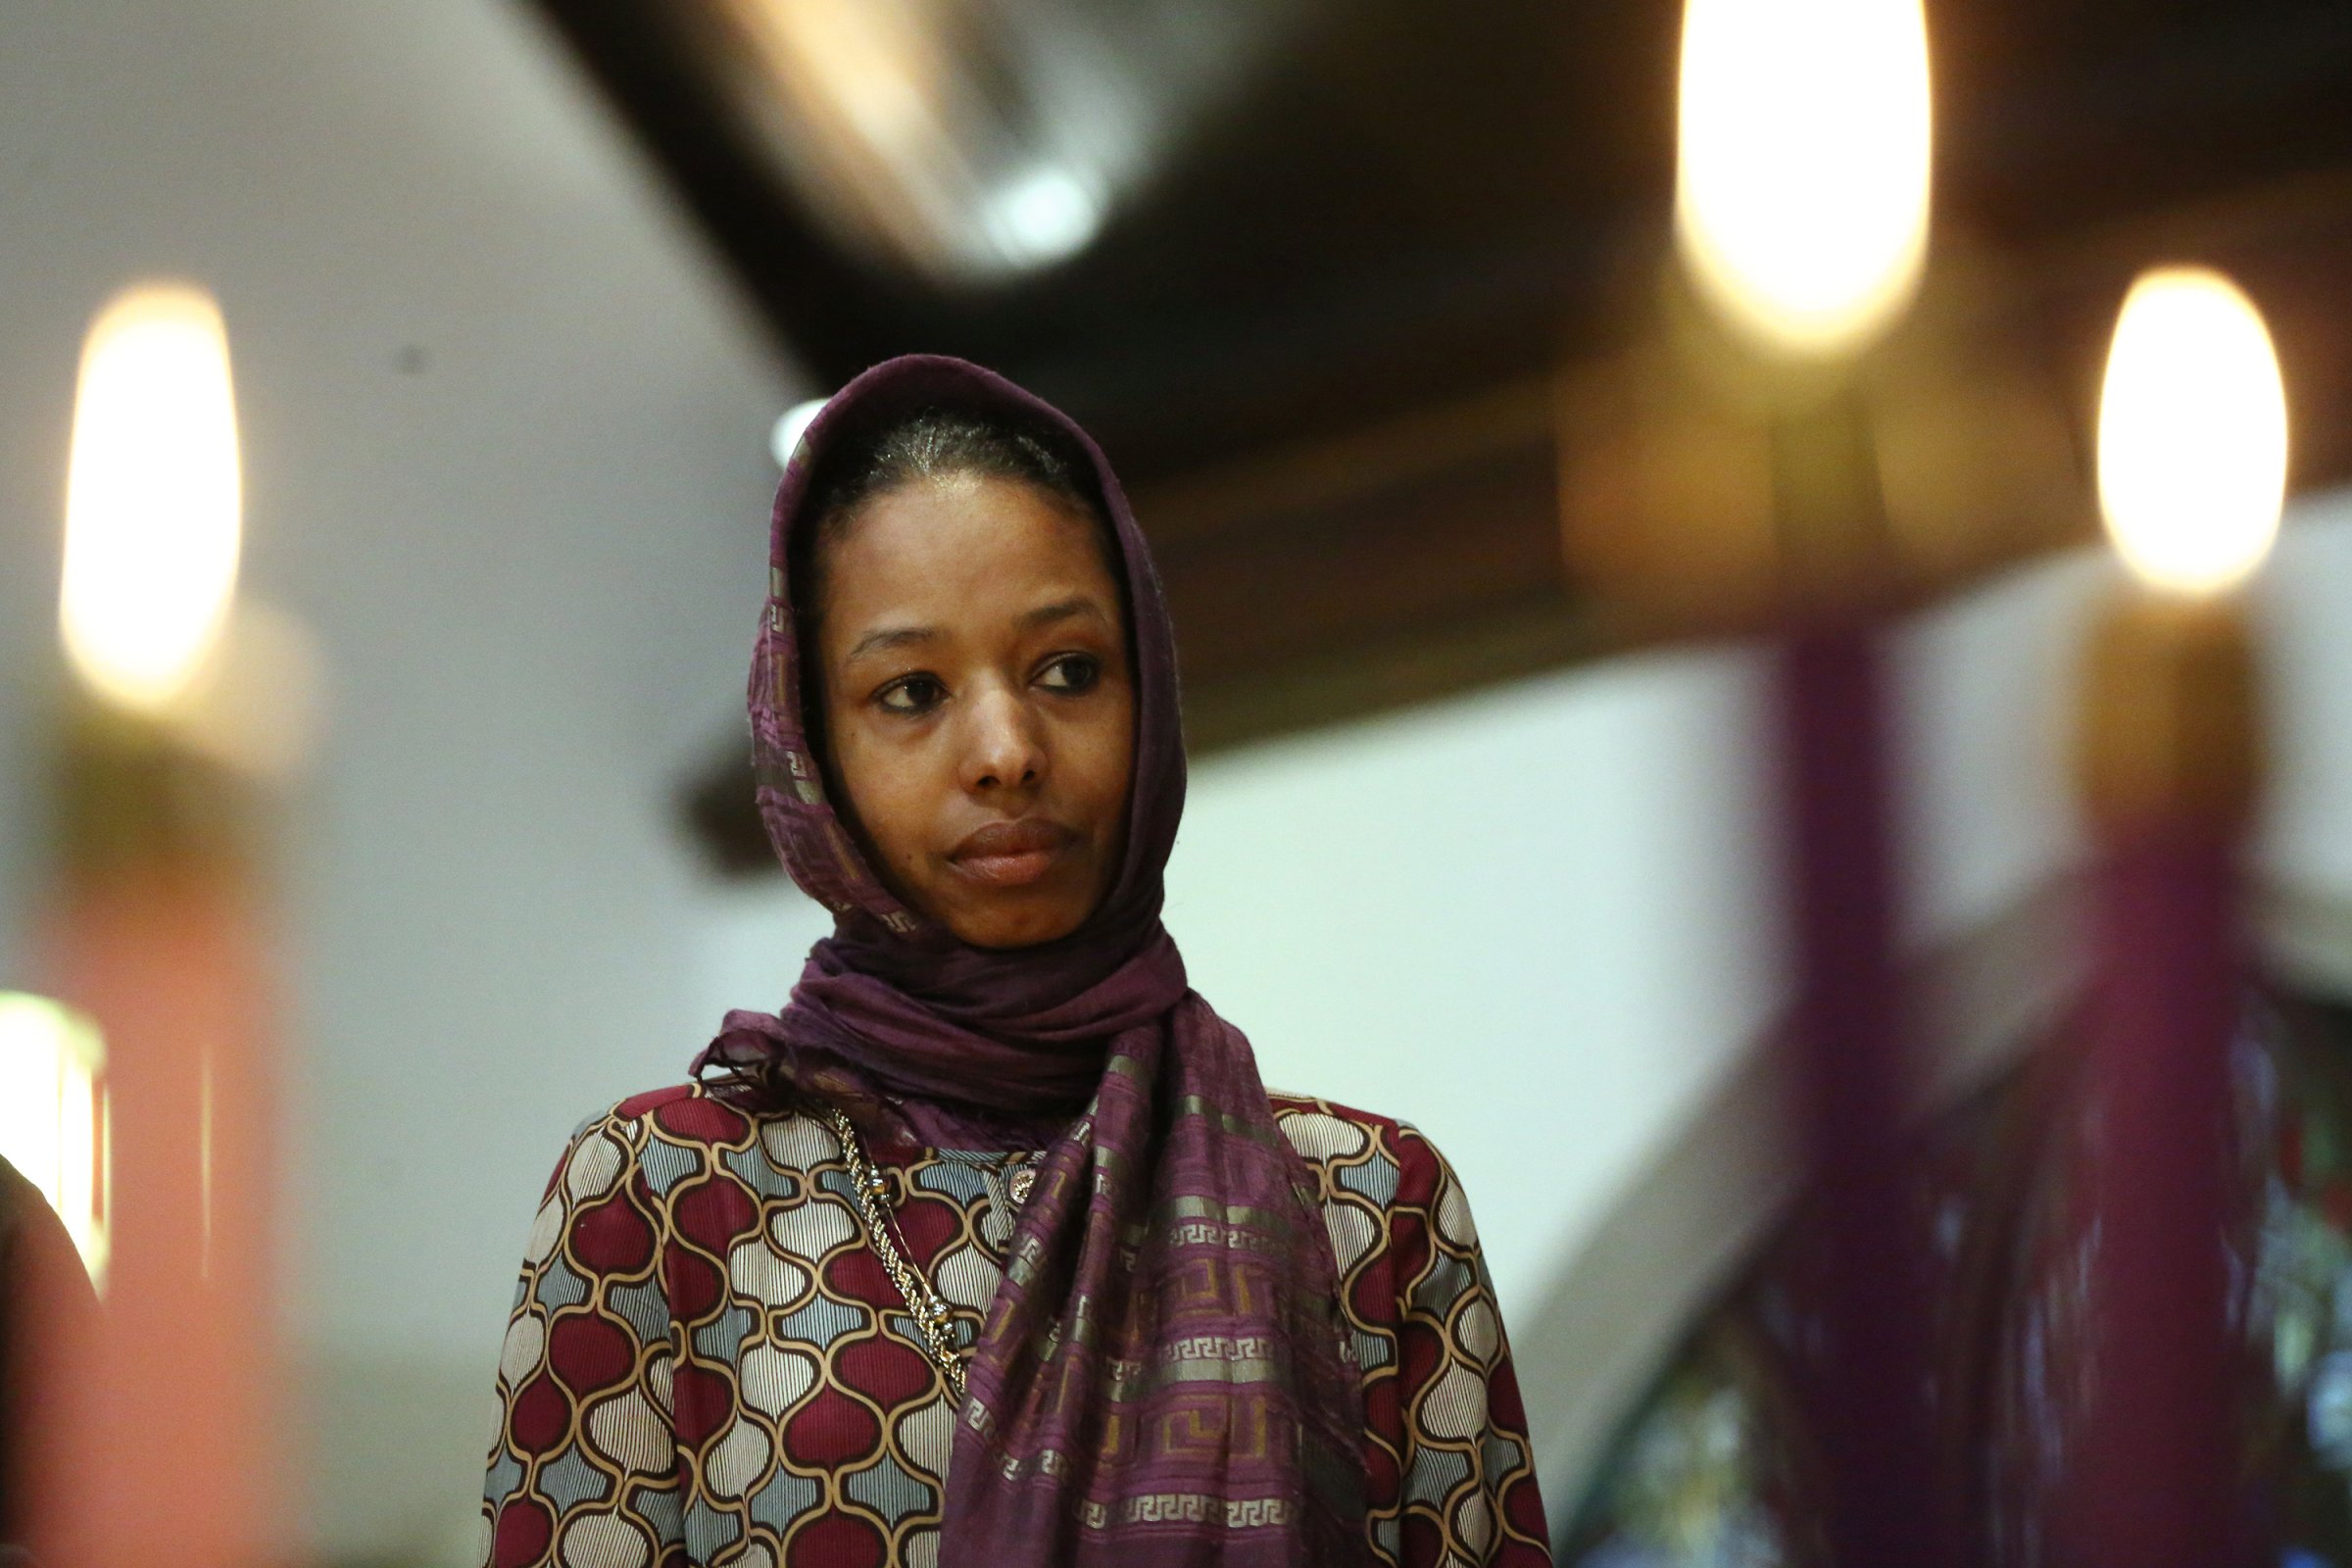 Larycia Hawkins, a Christian who is wearing a hijab over Advent in solidarity with Muslims, attends service at St. Martin Episcopal Church in Chicago on Dec. 13, 2015.